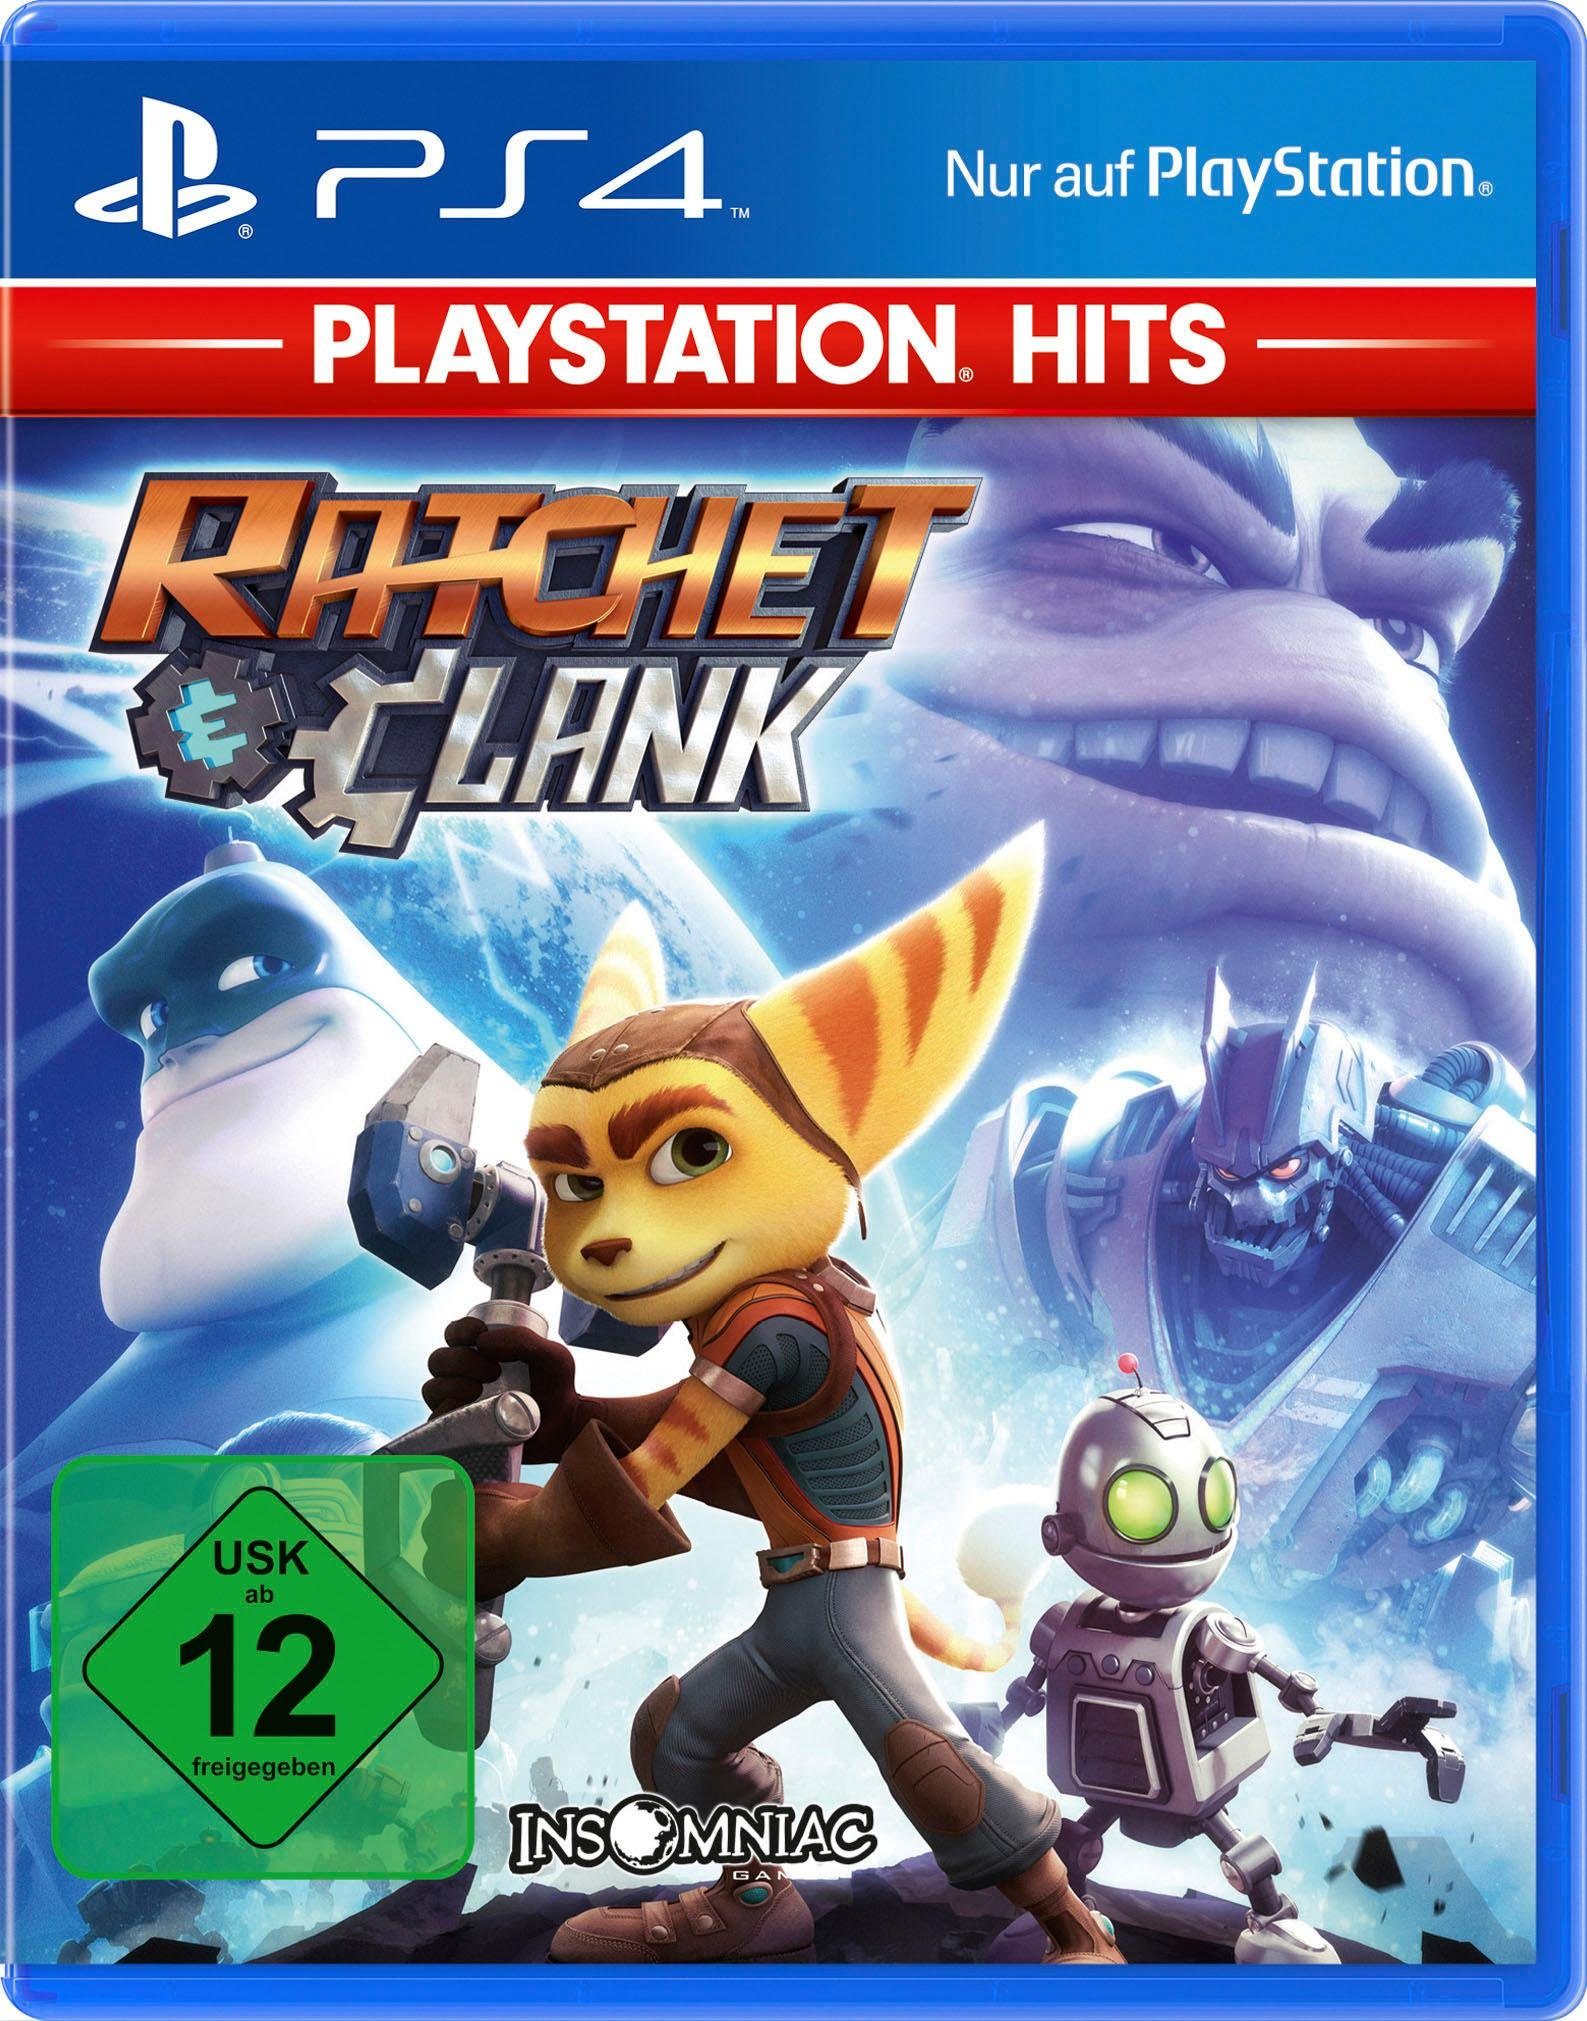 PlayStation & 4, Software Pyramide Ratchet Clank